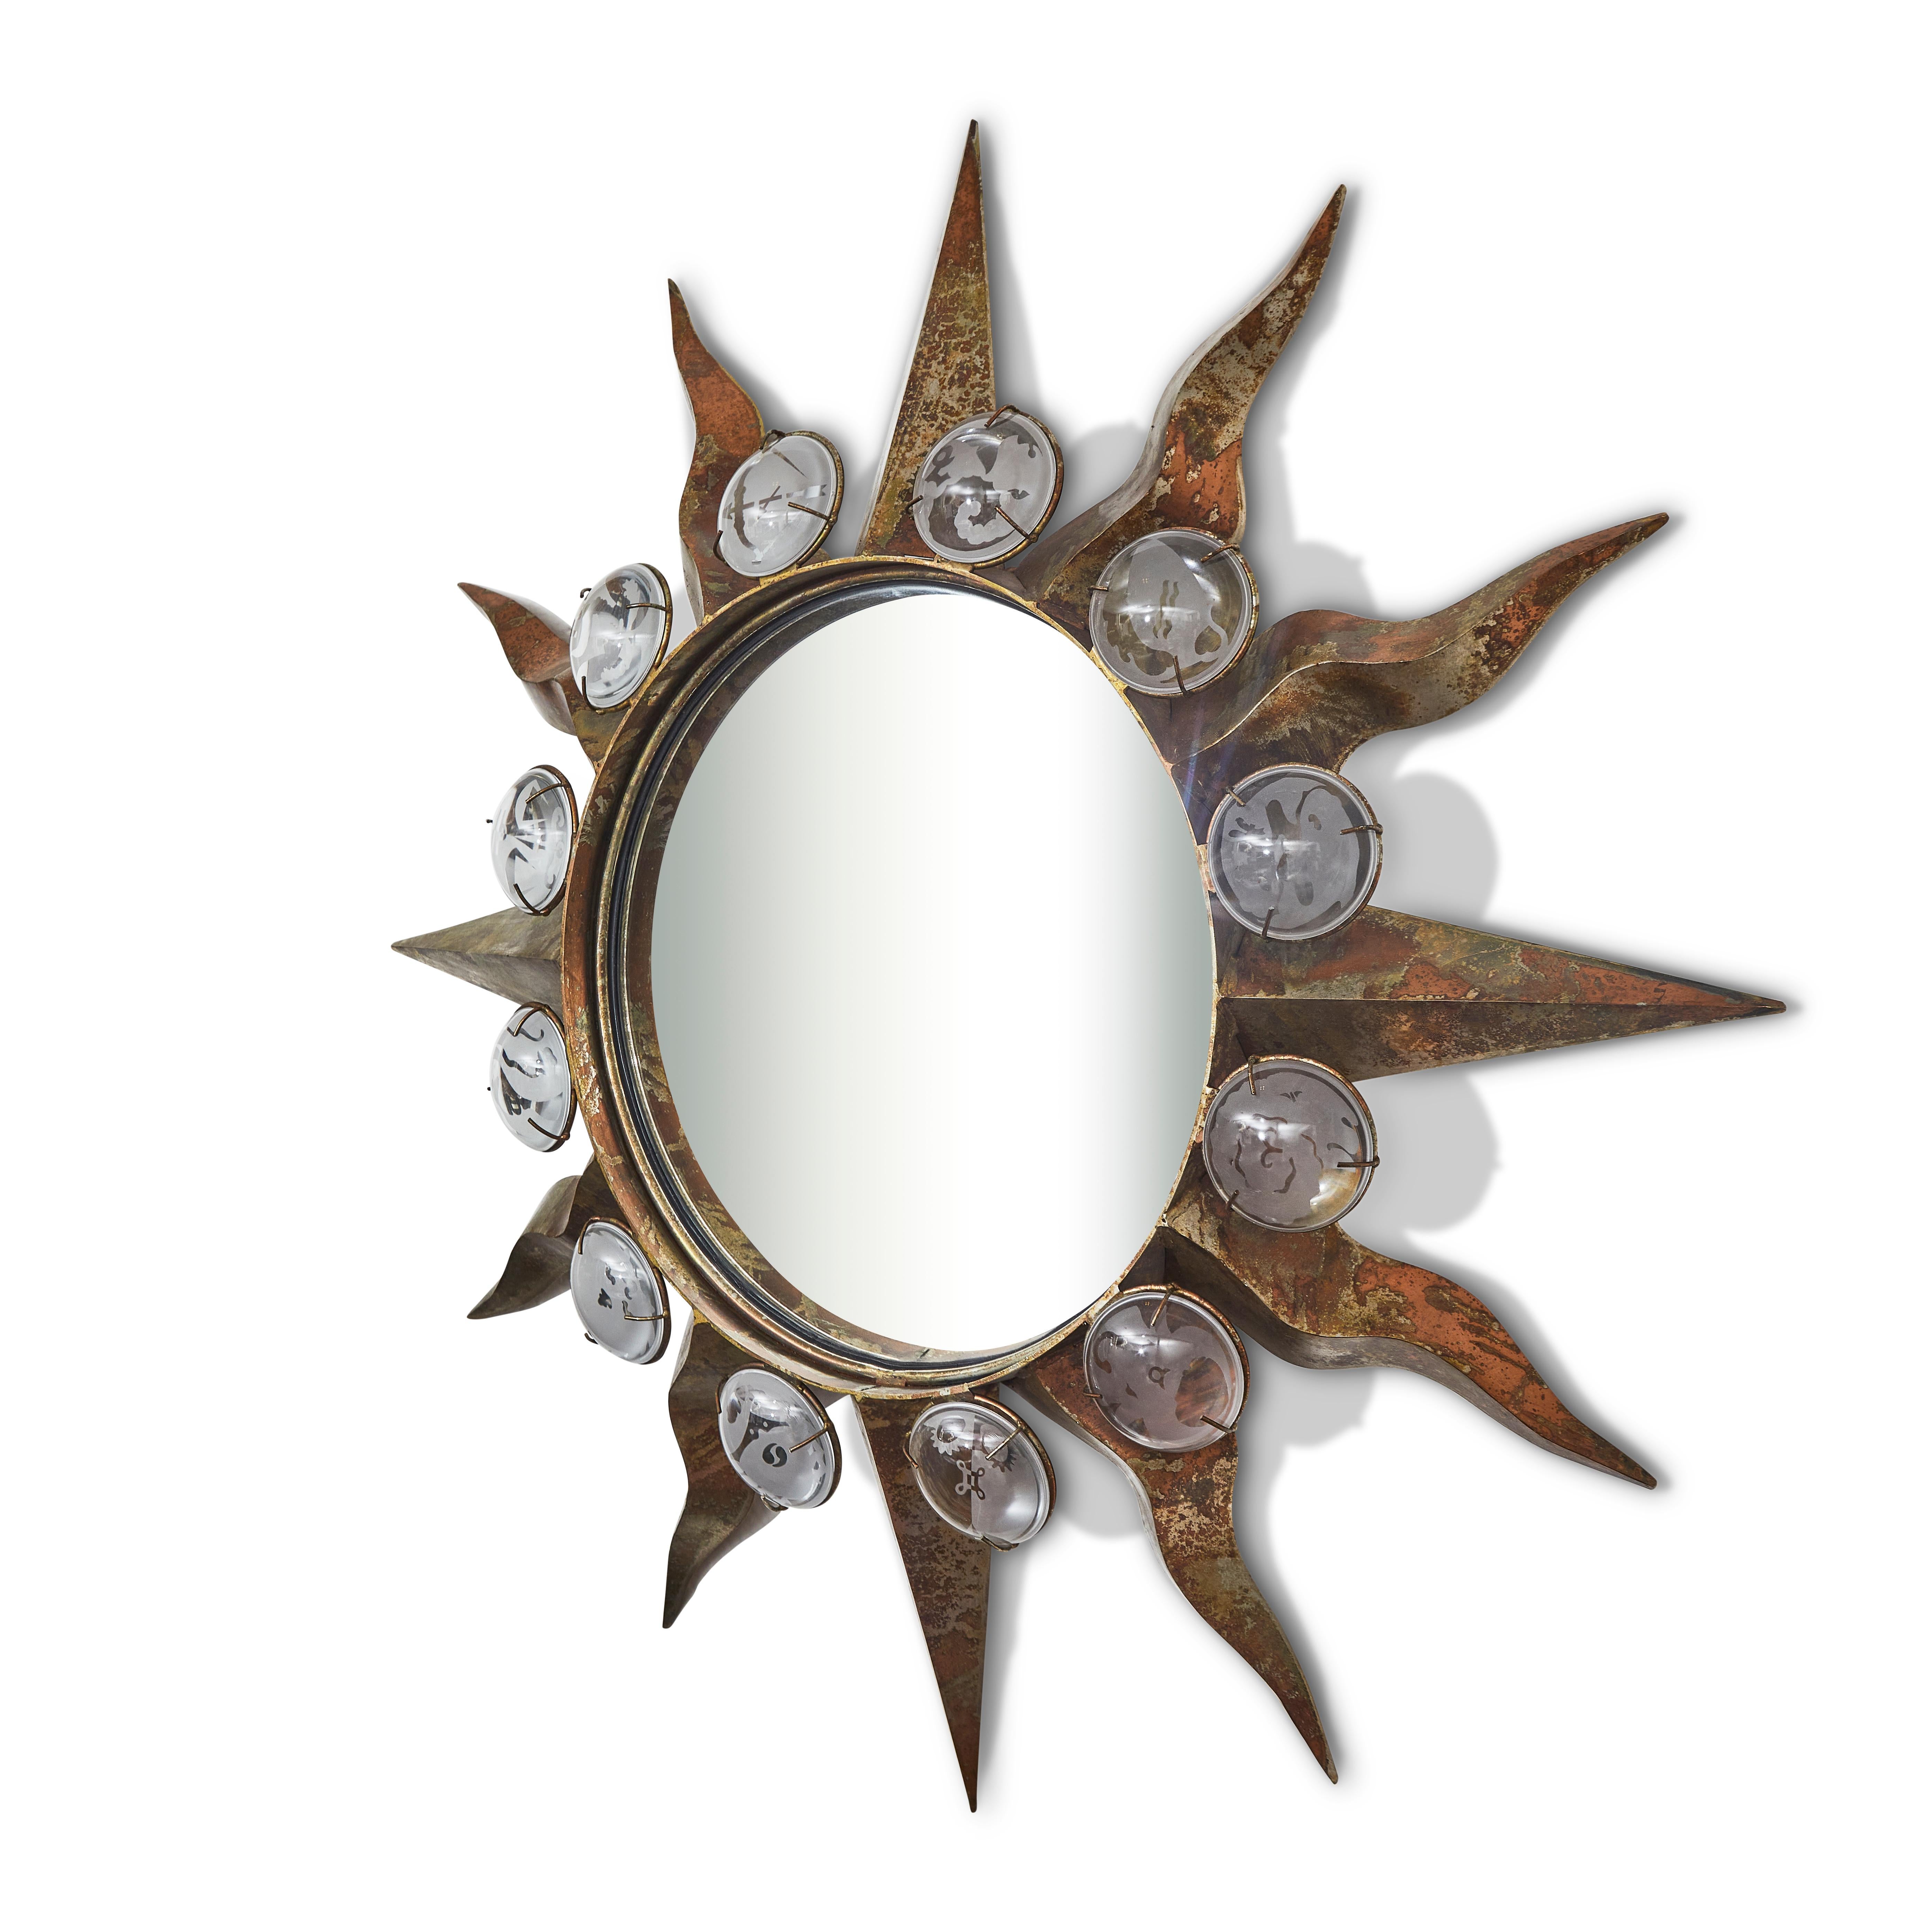 Mirror, Model 'Zodiac' in bronzed patinated steel, mirror and sandblasted glass. The decorative images around the mirror depict the signs of the zodiac. Created by the celebrated Artist and Designer, Mark Brazier-Jones in 1987.
Reference: Charlotte